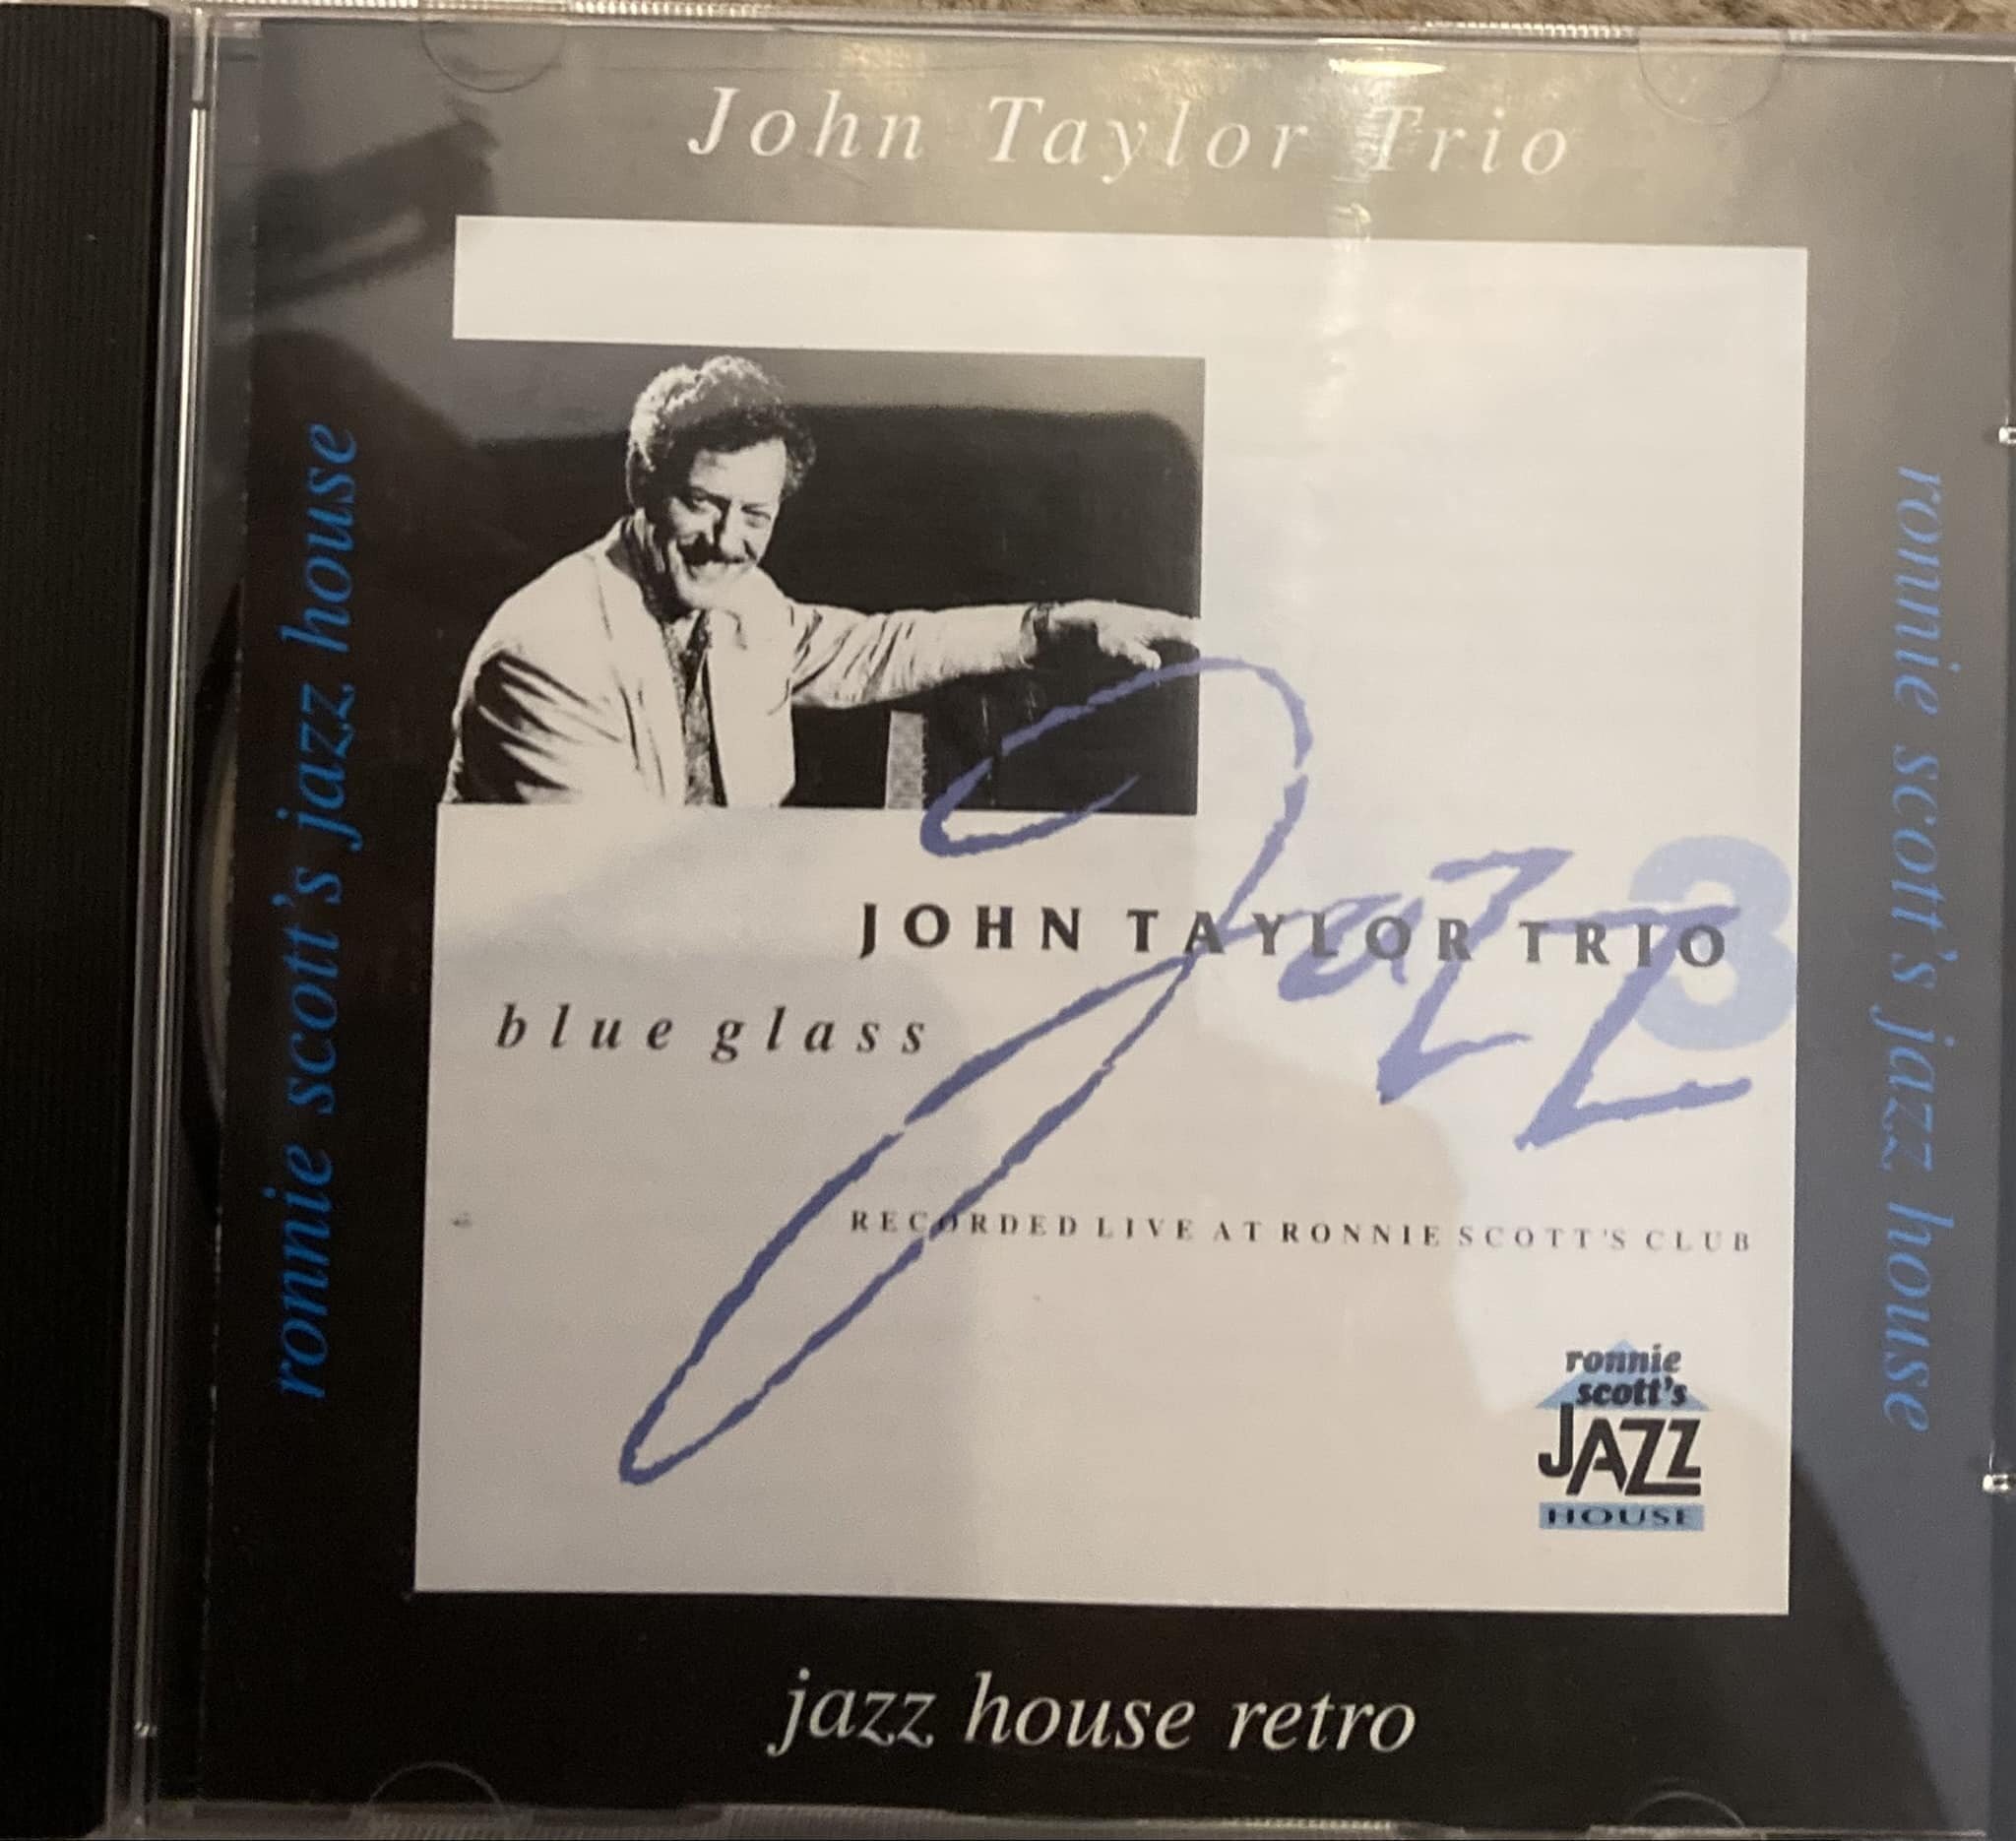 Just took delivery of this Gem. &ldquo;Blue Glass&rdquo; by the John Taylor trio with Mick Hutton &amp; Steve Arguelles , jazz heaven !